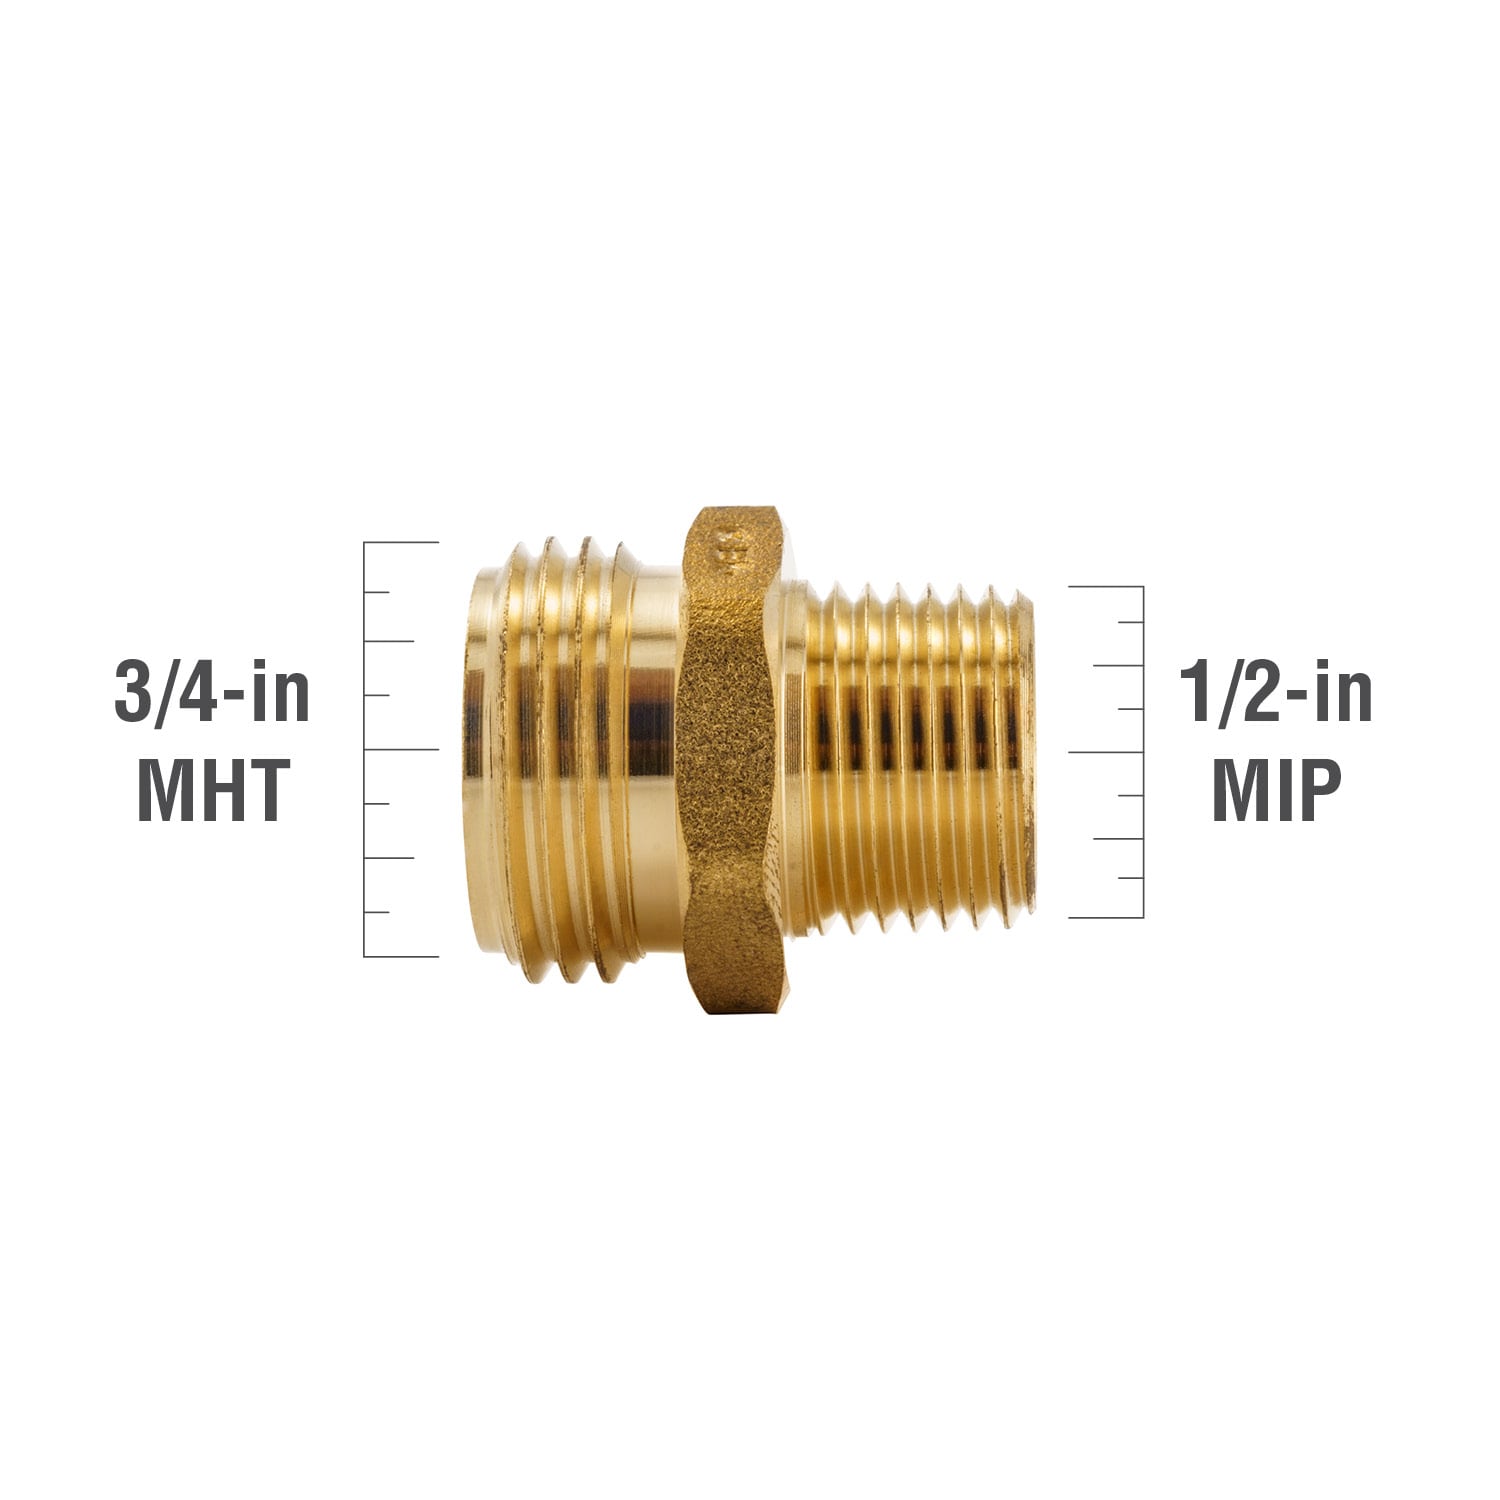 Proline Series 3/4-in x 1-in Threaded Male Adapter Bushing Fitting